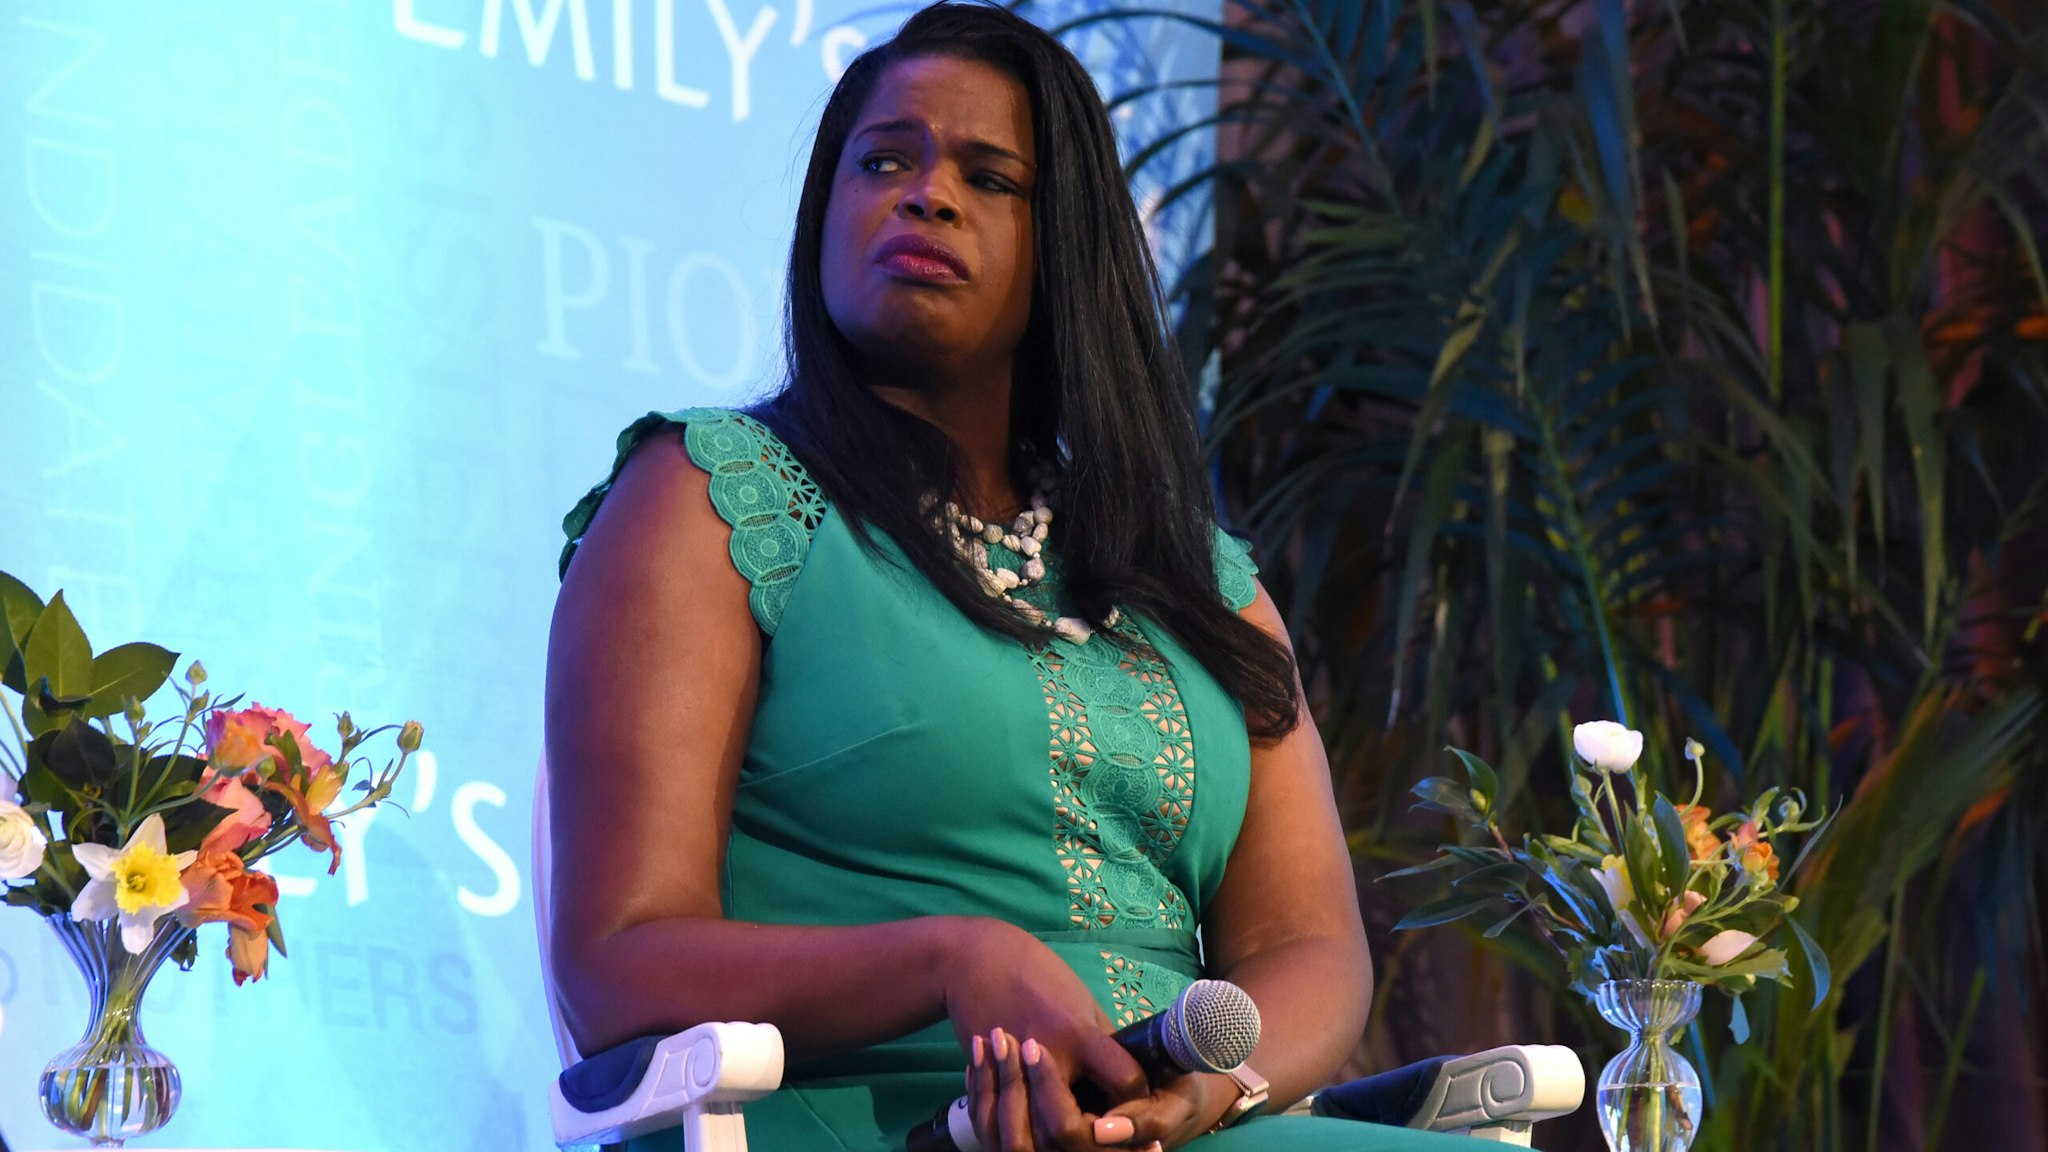 LOS ANGELES, CALIFORNIA - FEBRUARY 19: Kim Foxx speaks onstage during Raising Our Voices: Supporting More Women in Hollywood & Politics at Four Seasons Hotel Los Angeles in Beverly Hills on February 19, 2019 in Los Angeles, California. (Photo by Presley Ann/Getty Images for EMILY'S List)